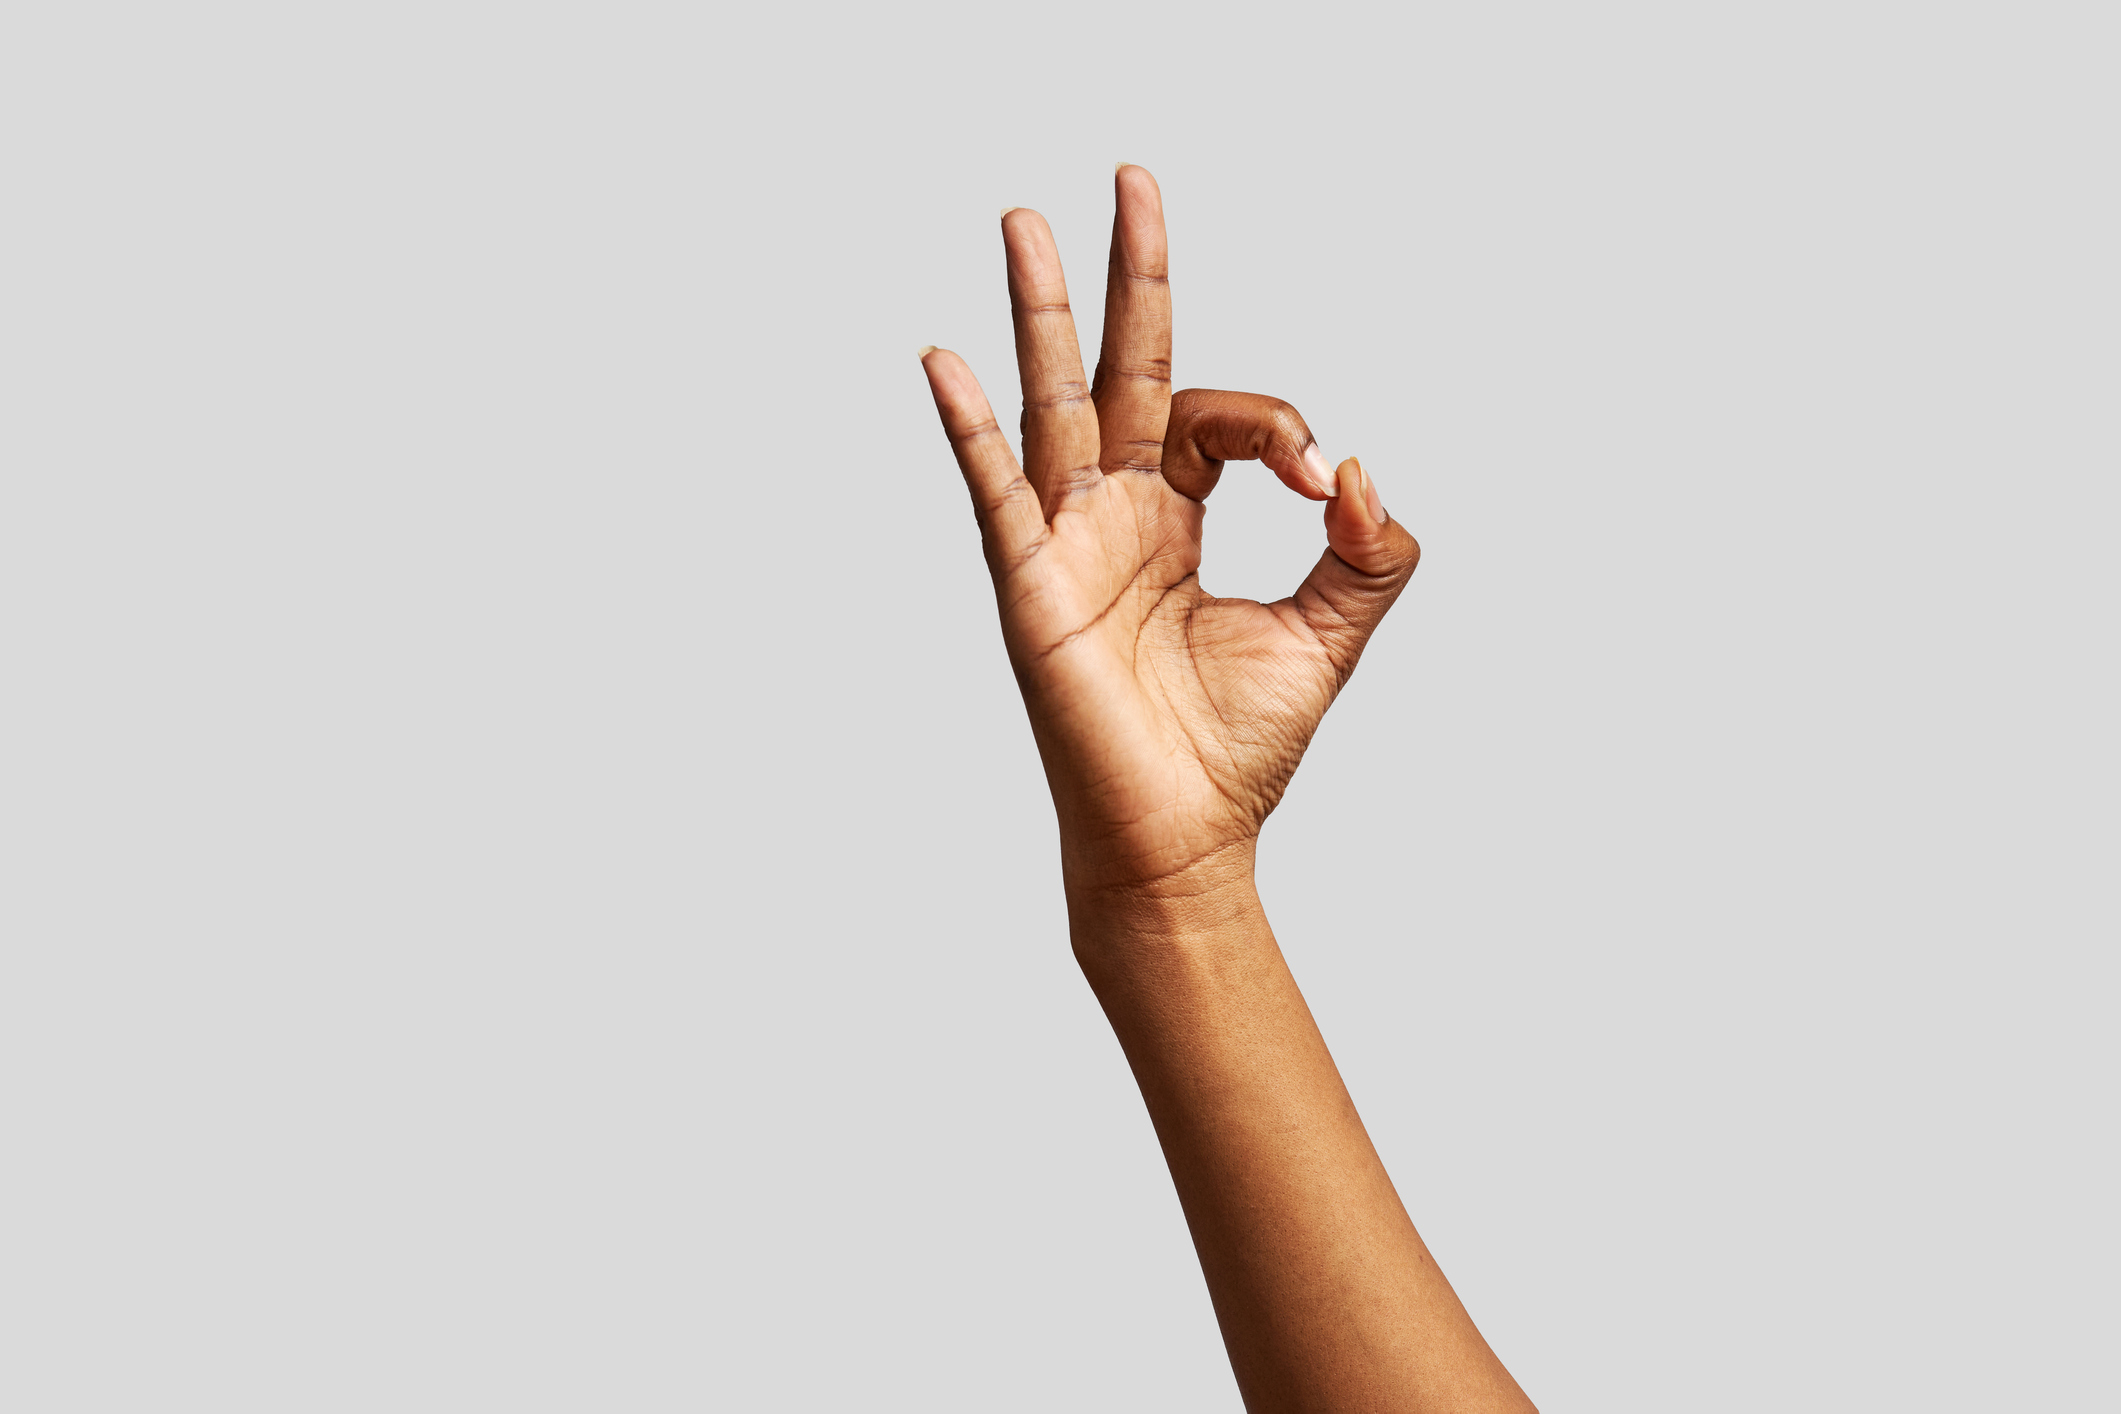 Hand making okay sign against a plain background